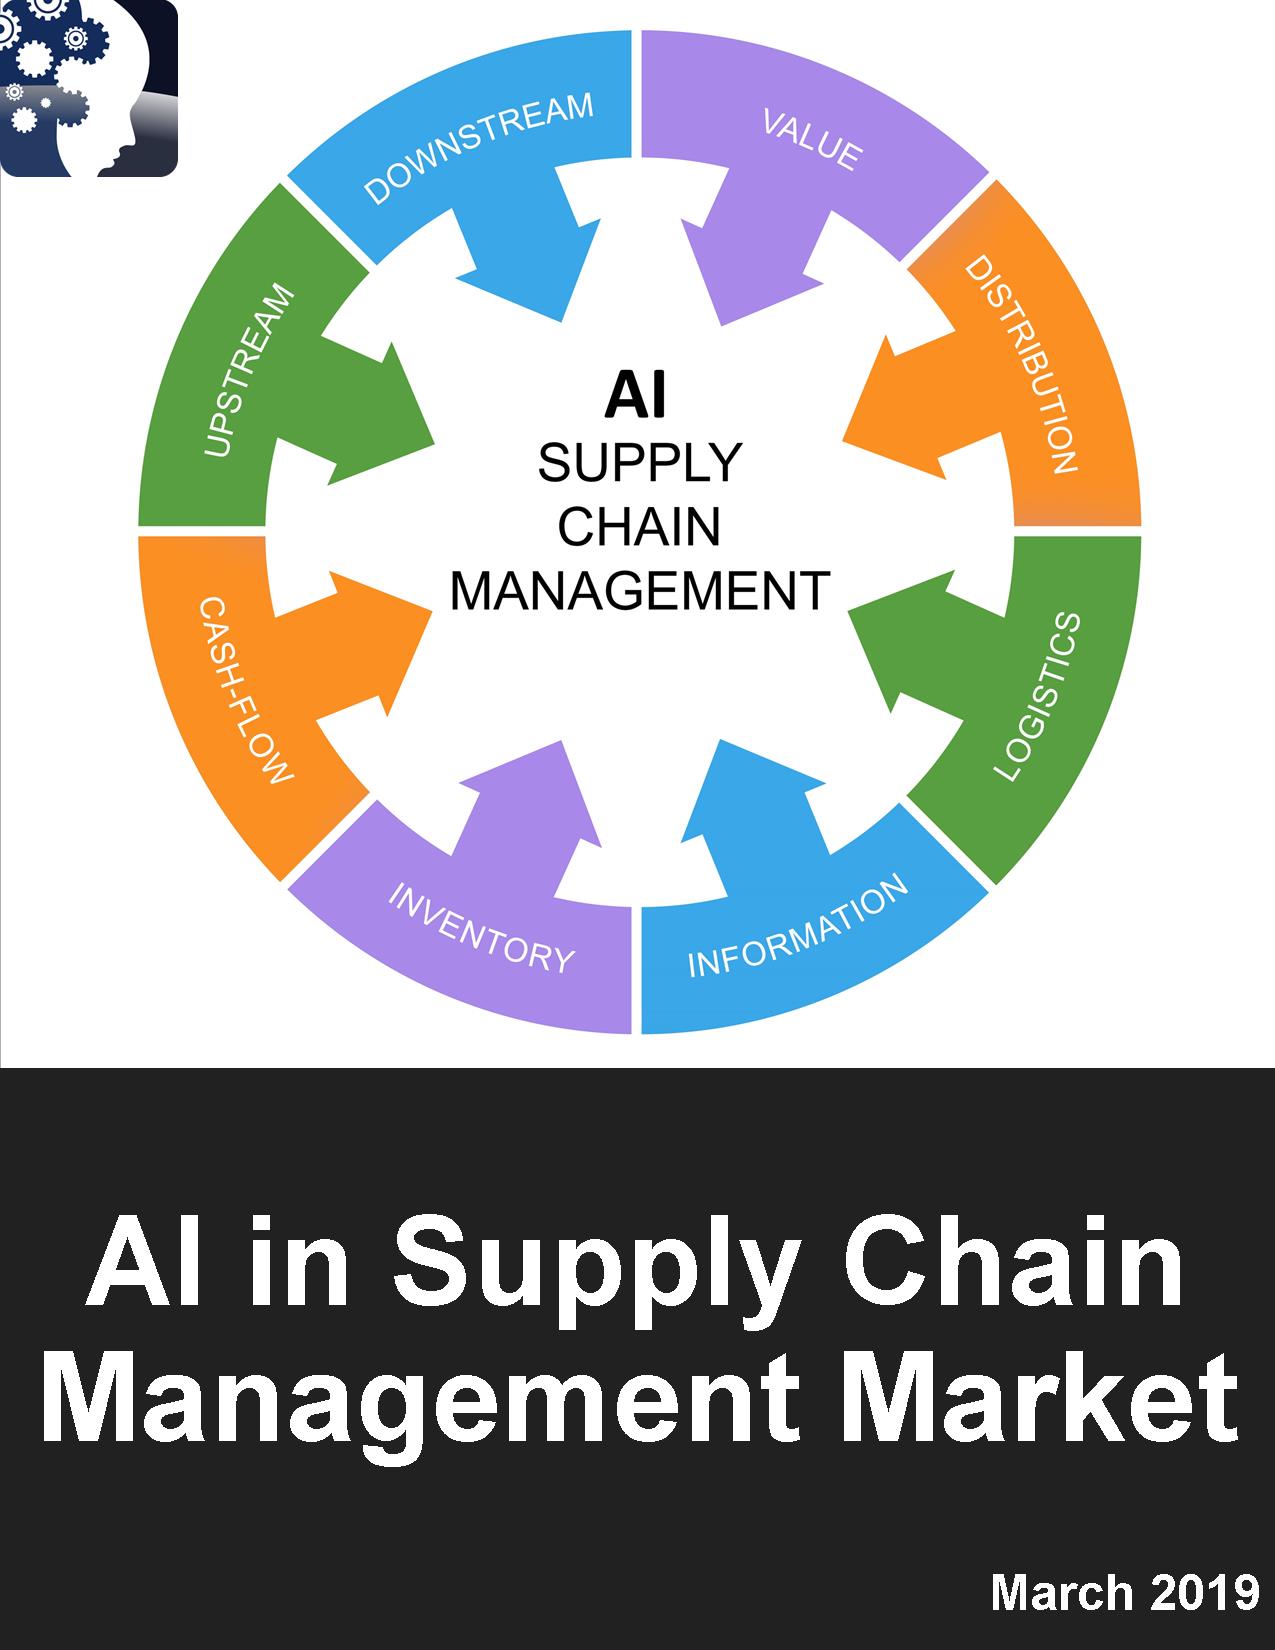 literature review on supply chain management(scm)